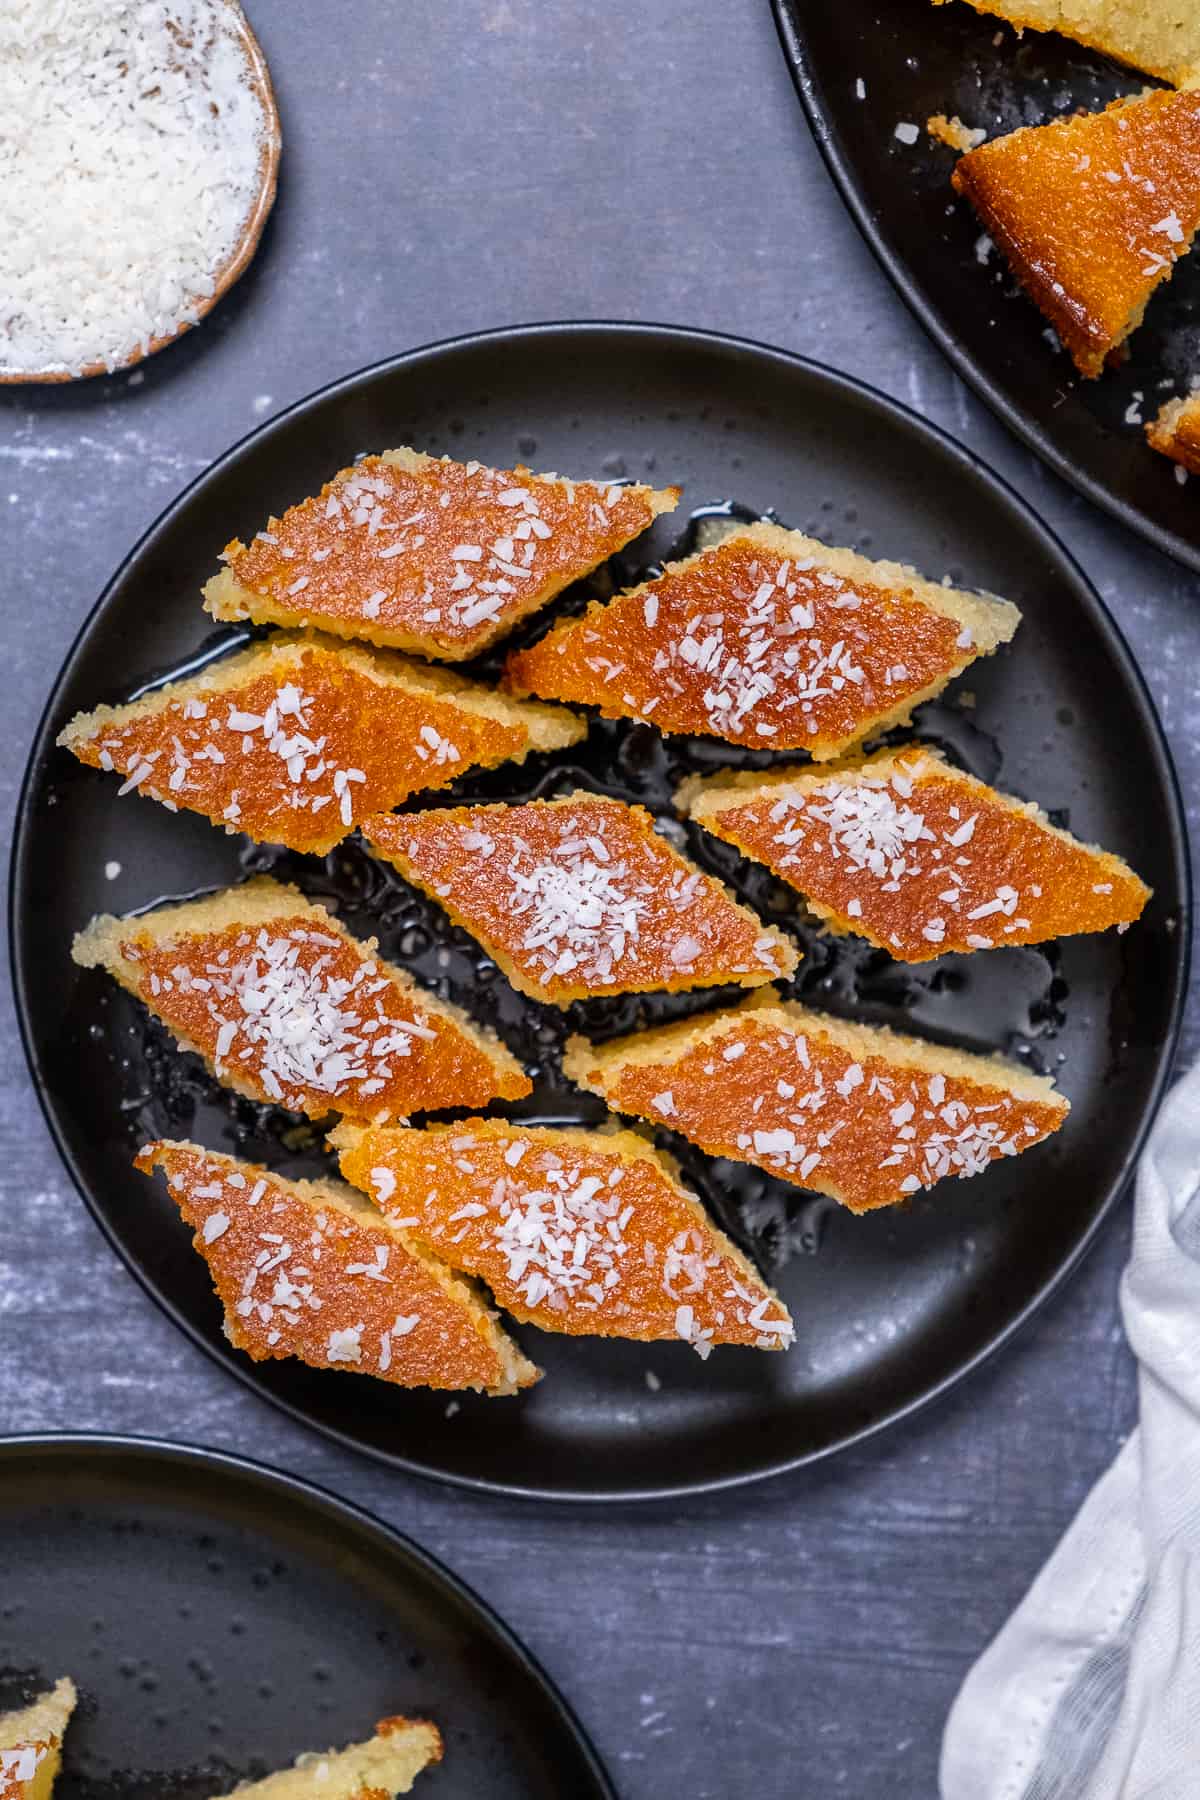 Semolina cake slices garnished with coconut flakes on a black plate.